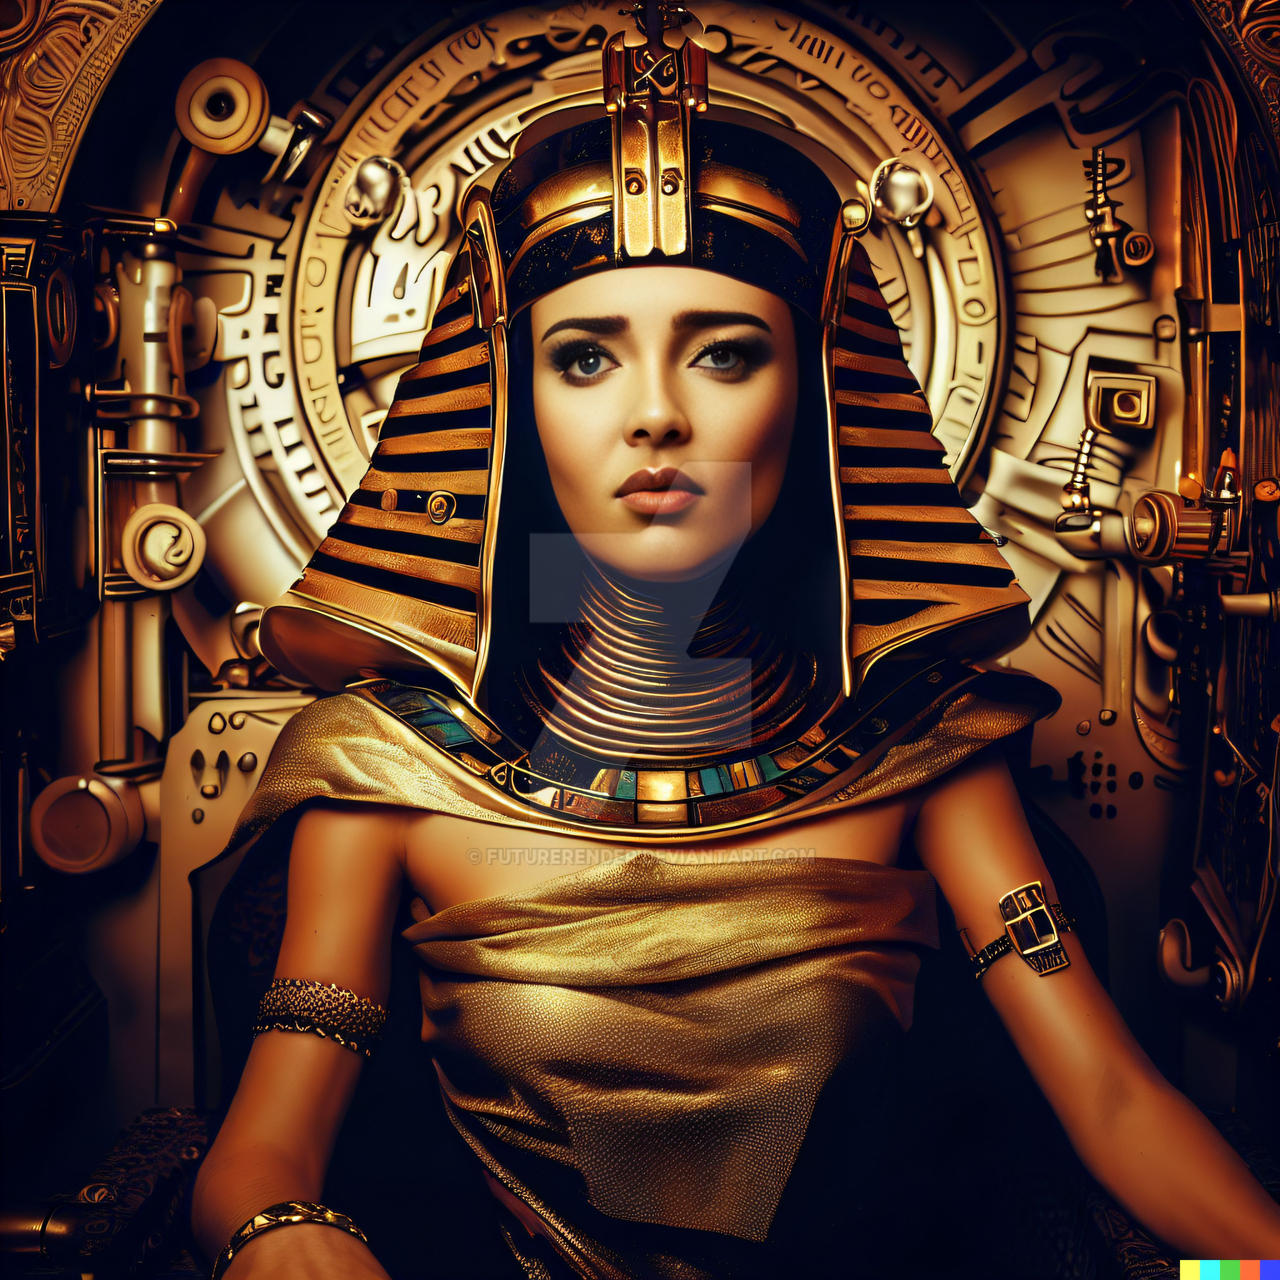 Cleopatra in the Time Machine #2 by FutureRender on DeviantArt